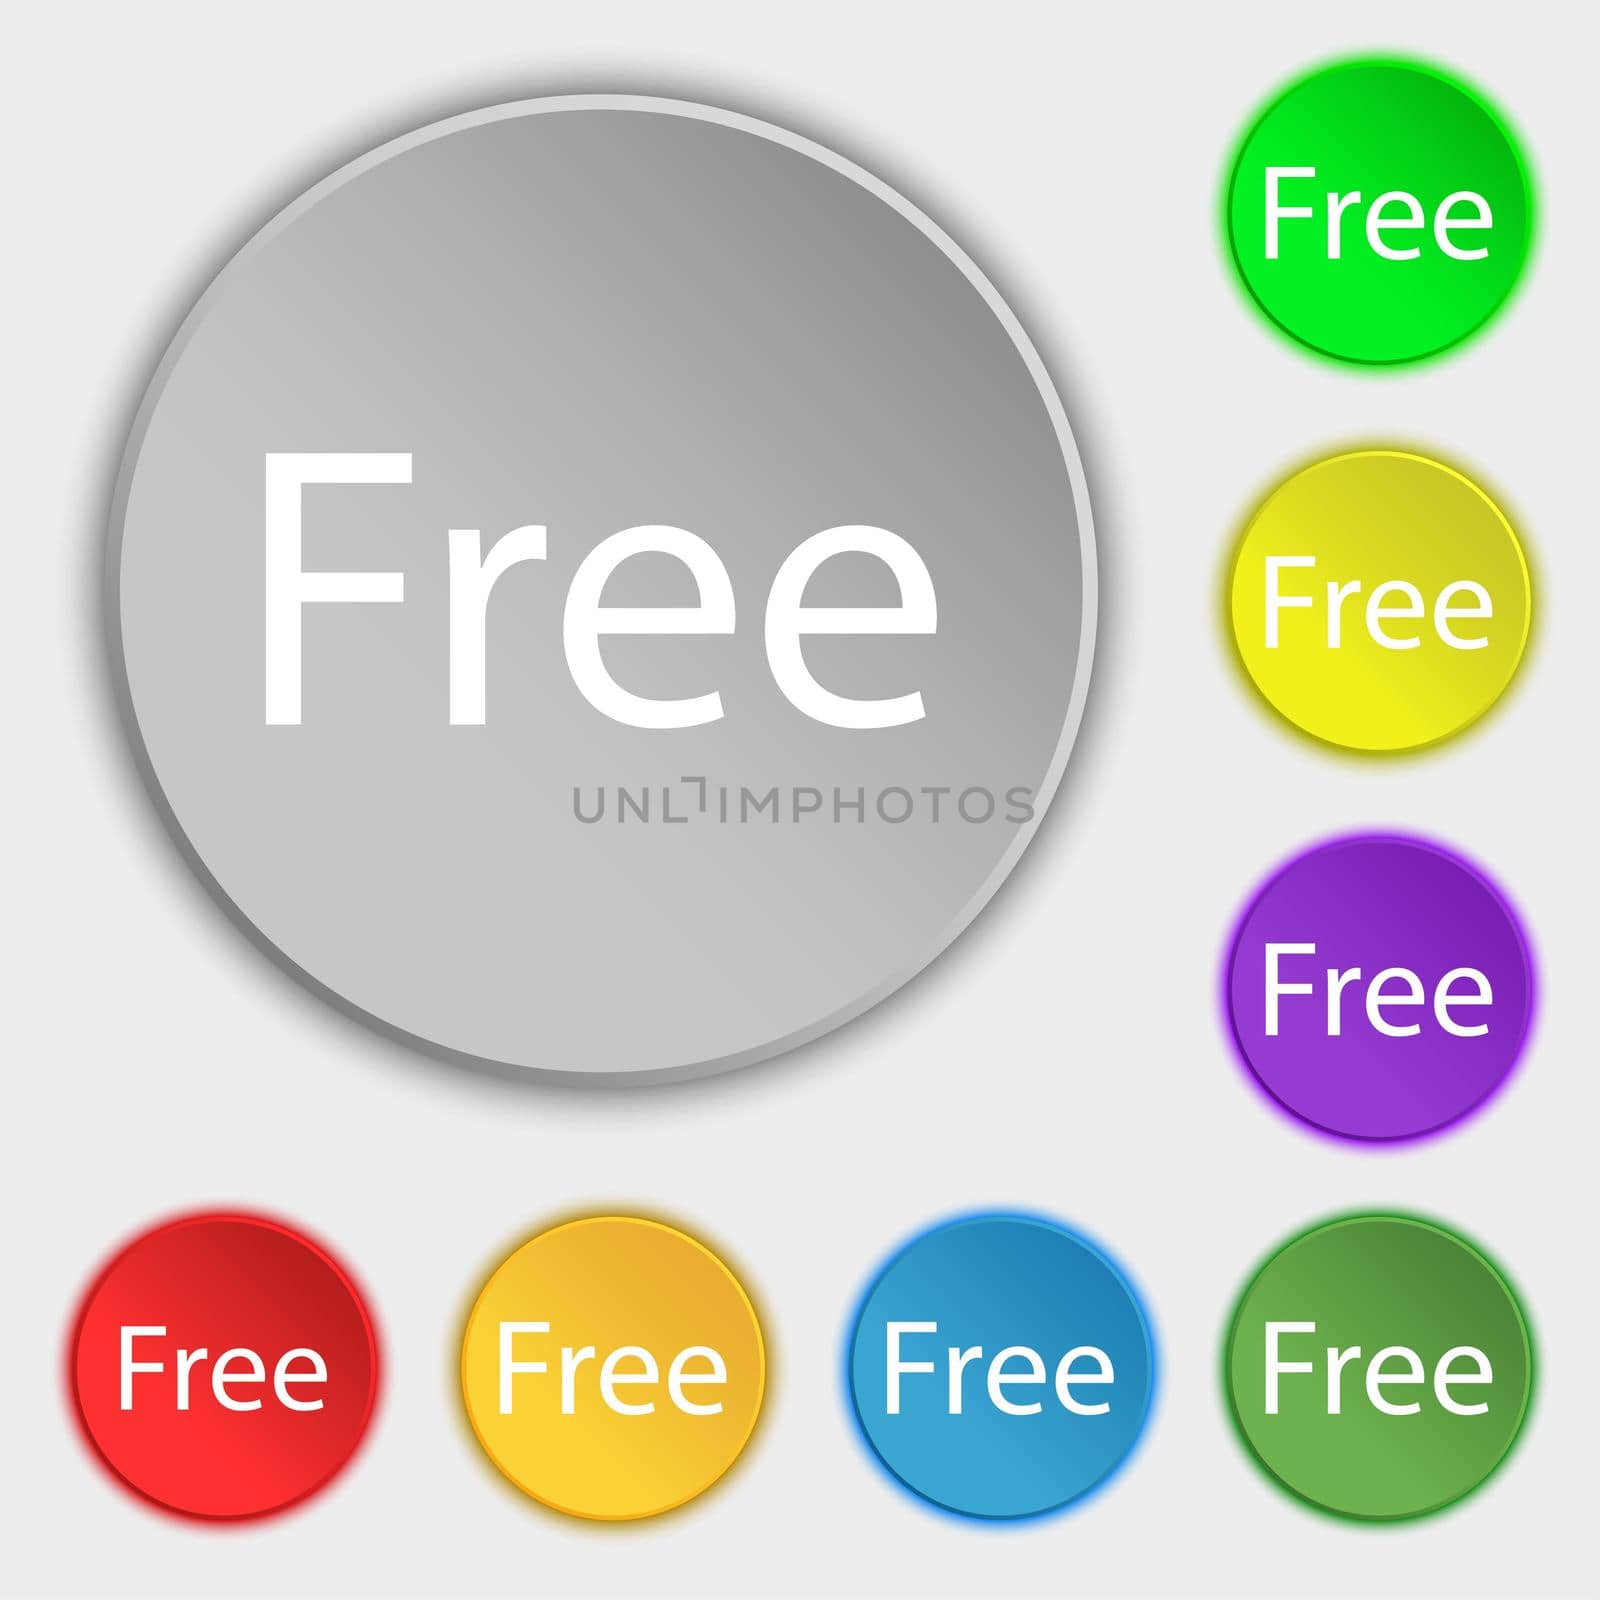 Free sign icon. Special offer symbol. Symbols on eight flat buttons. illustration